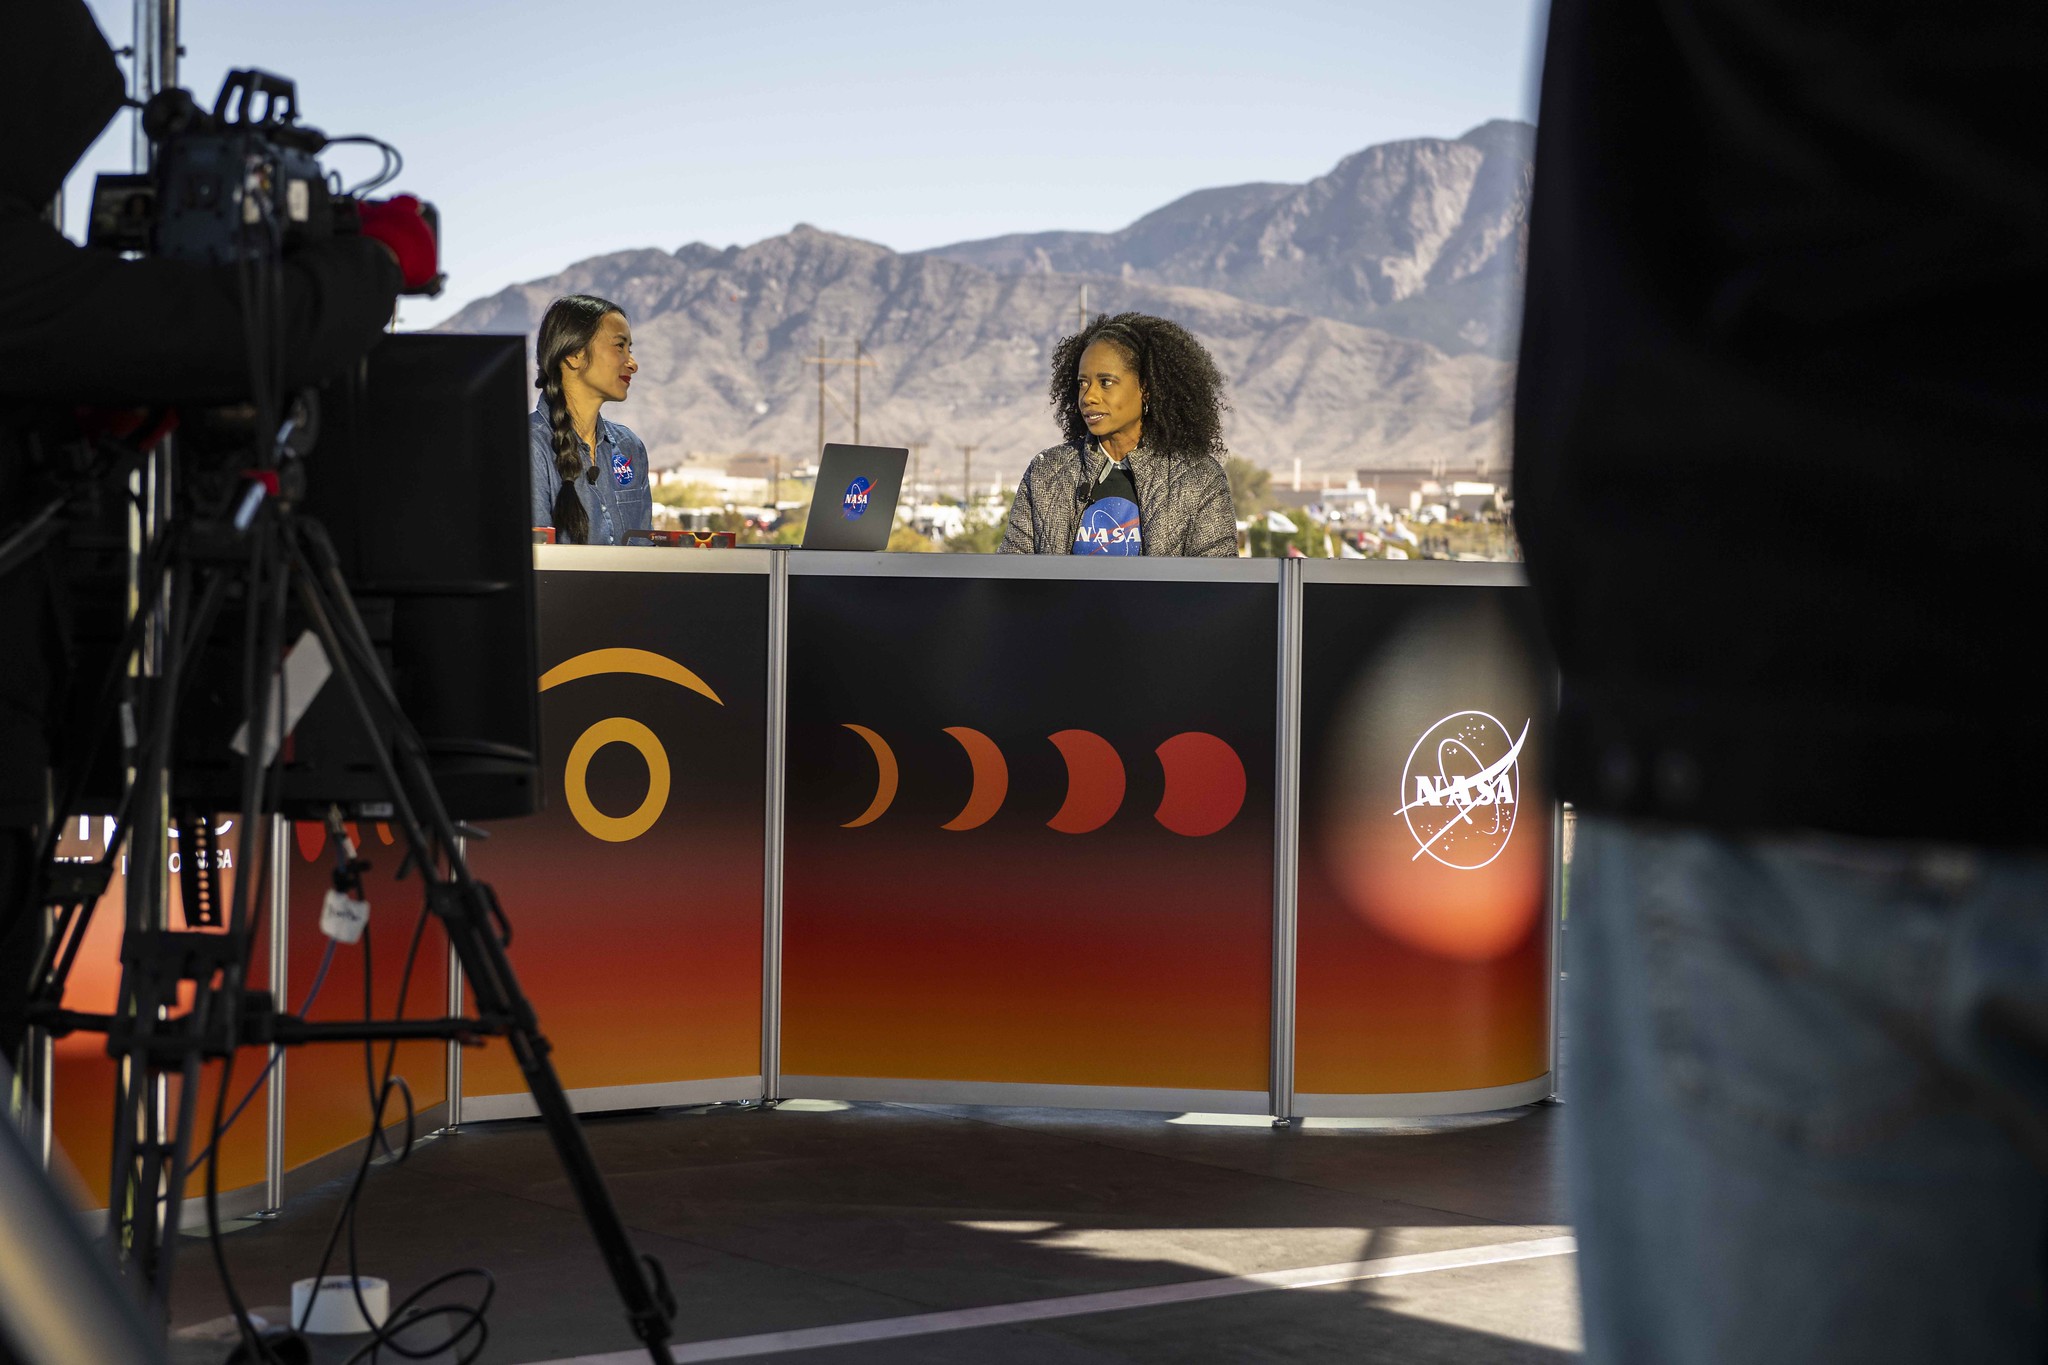 Two women sit at a desk outside. The desk is decorated with art that represents an annular eclipse. There are people and a camera recording them. In the background are mountains.